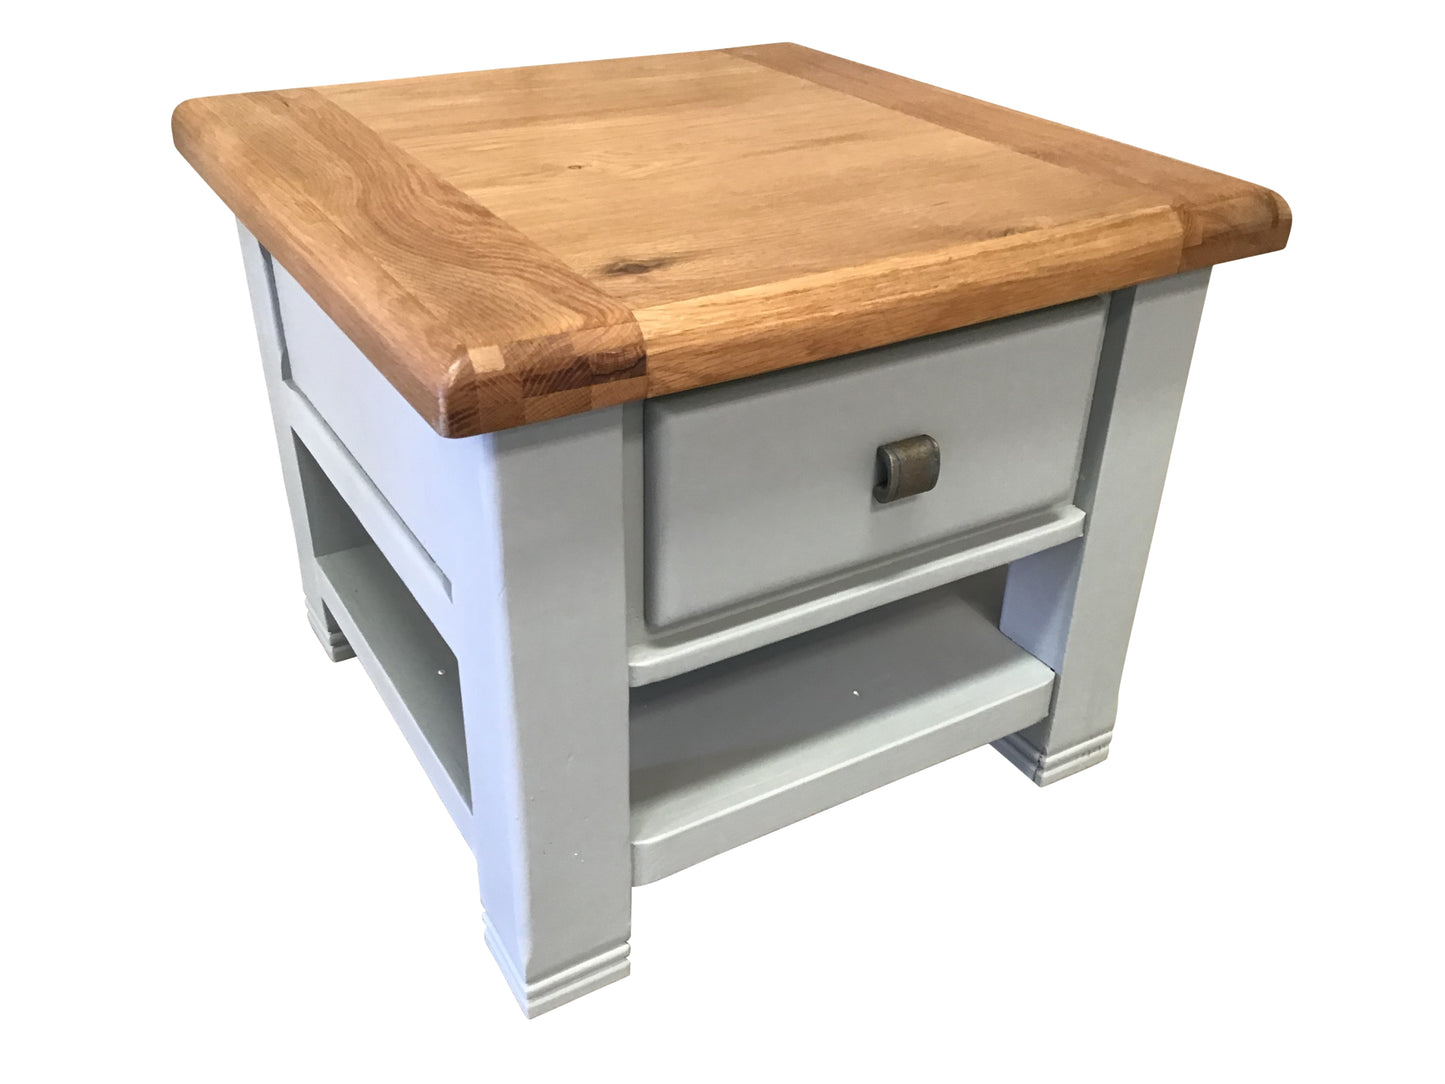 Danube Oak Lamp Table with Drawer painted French Grey